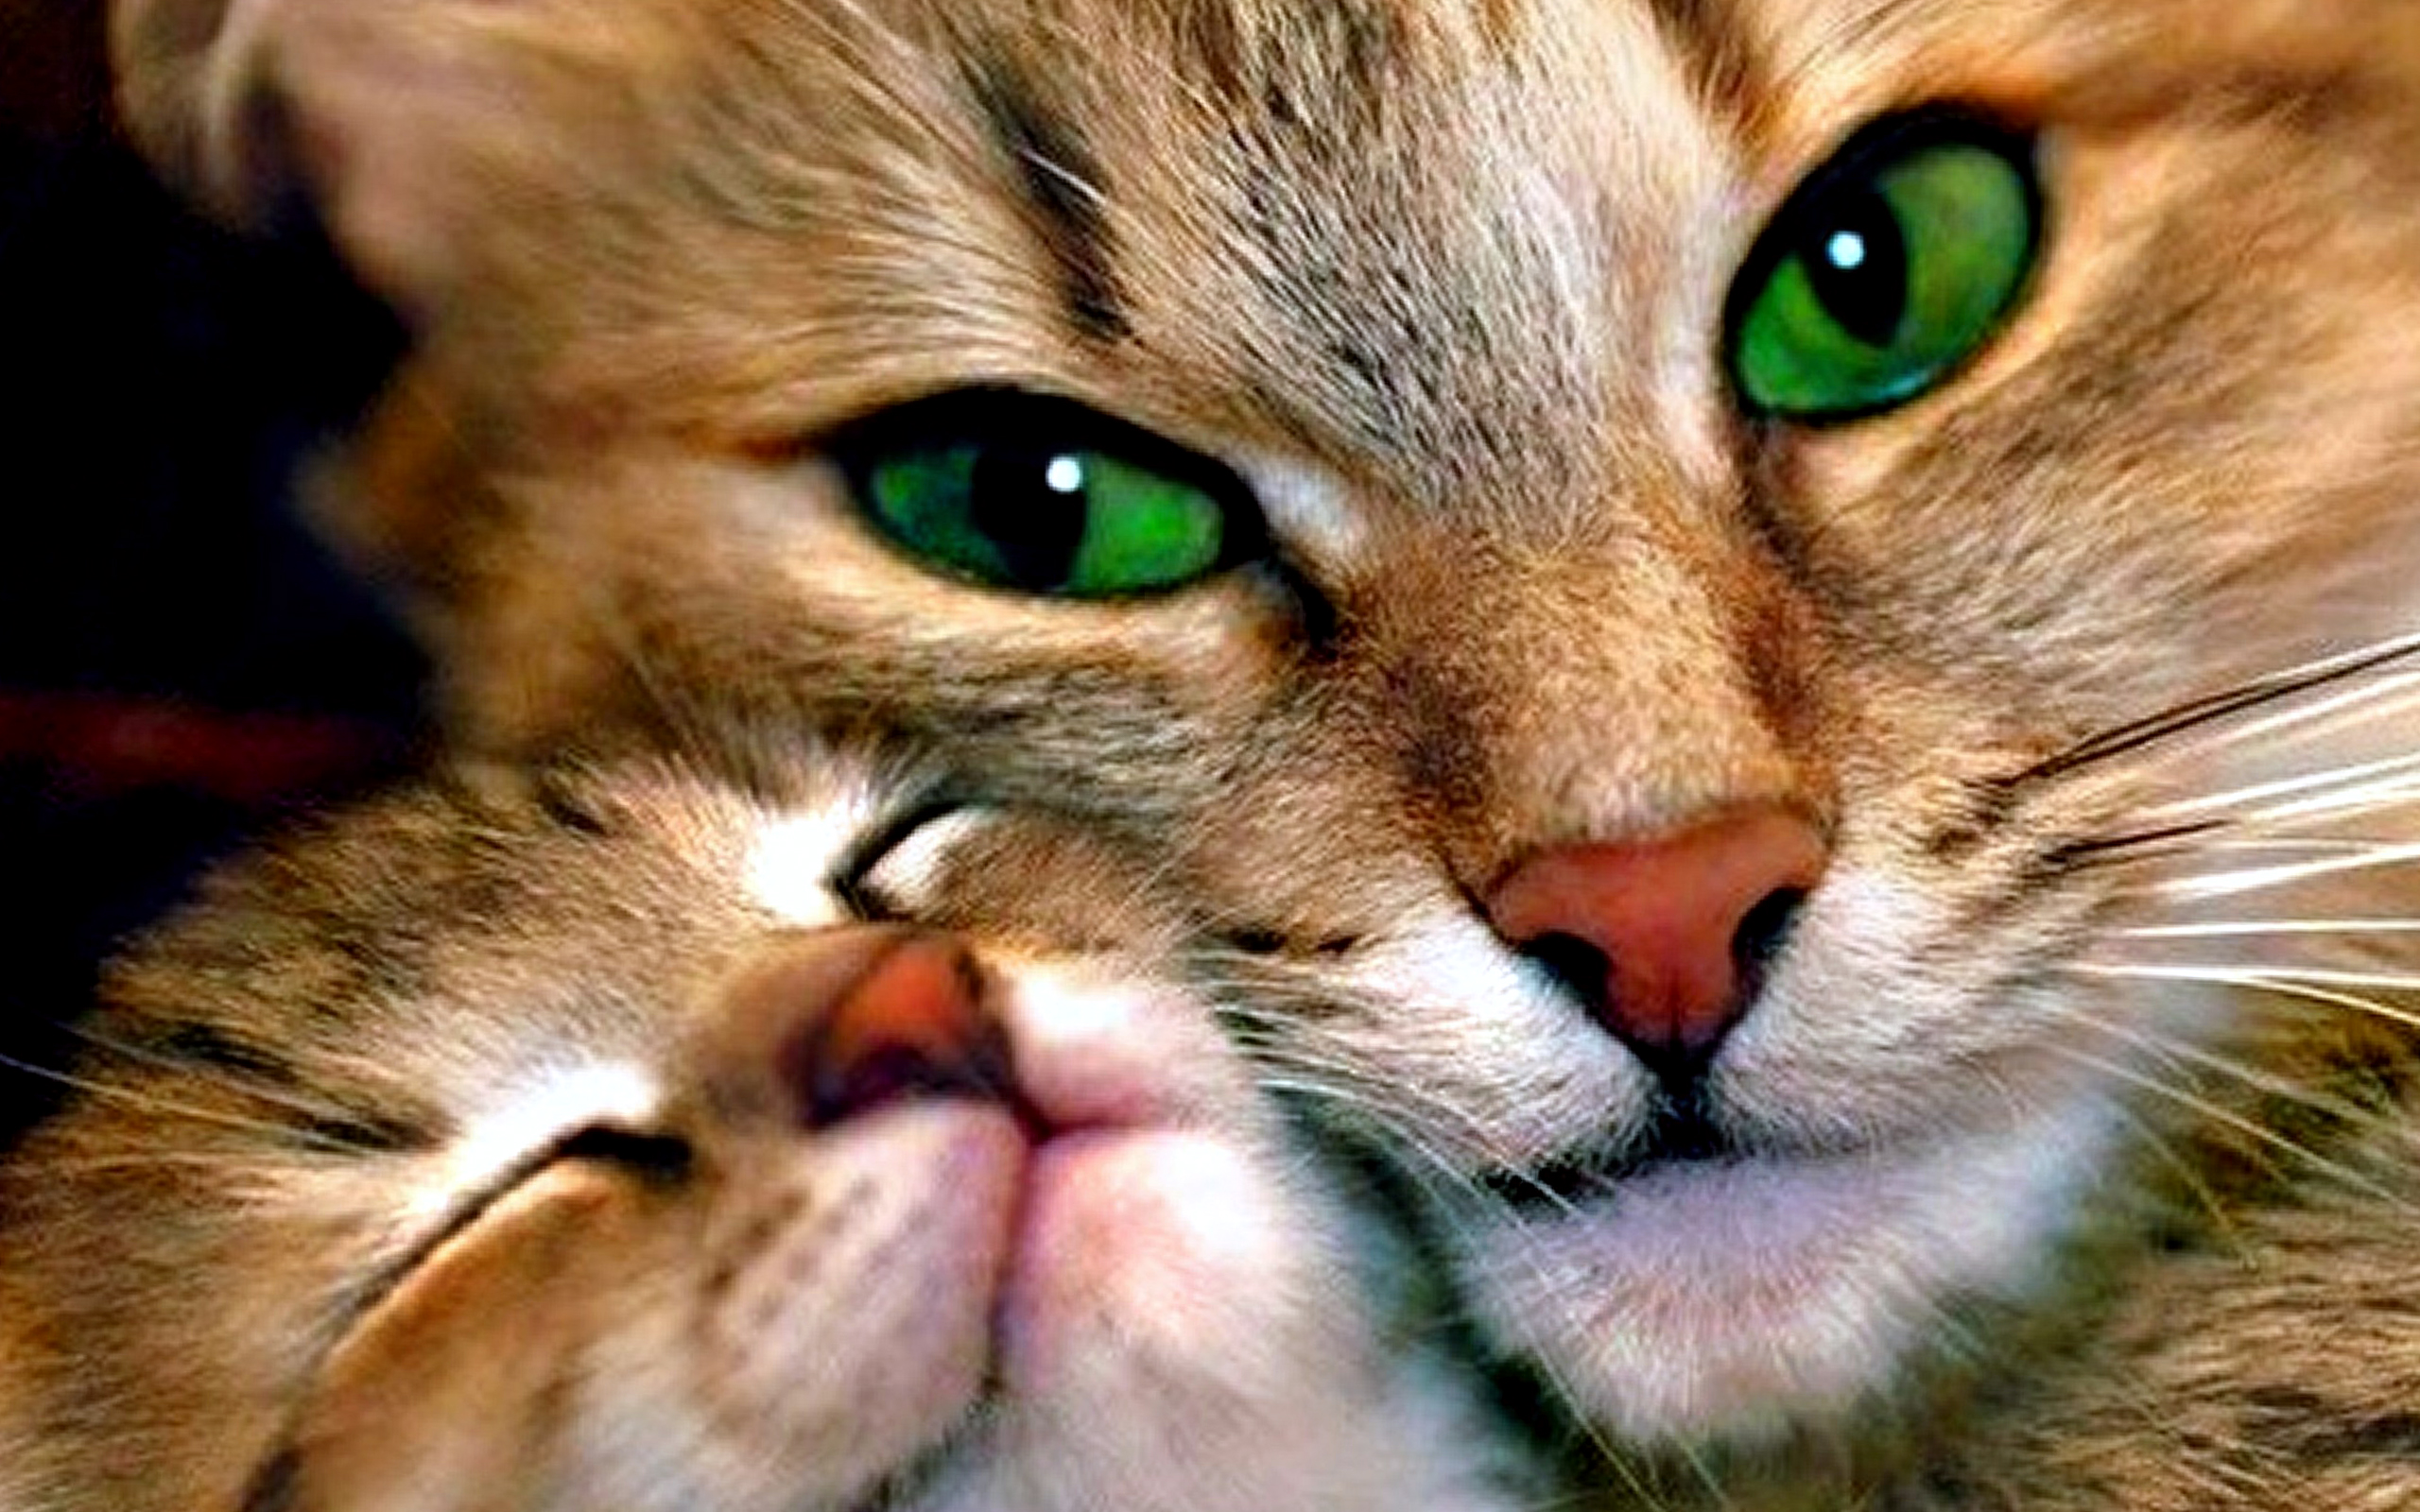 Mother and child cat wallpapers hd desktop and mobile backgrounds